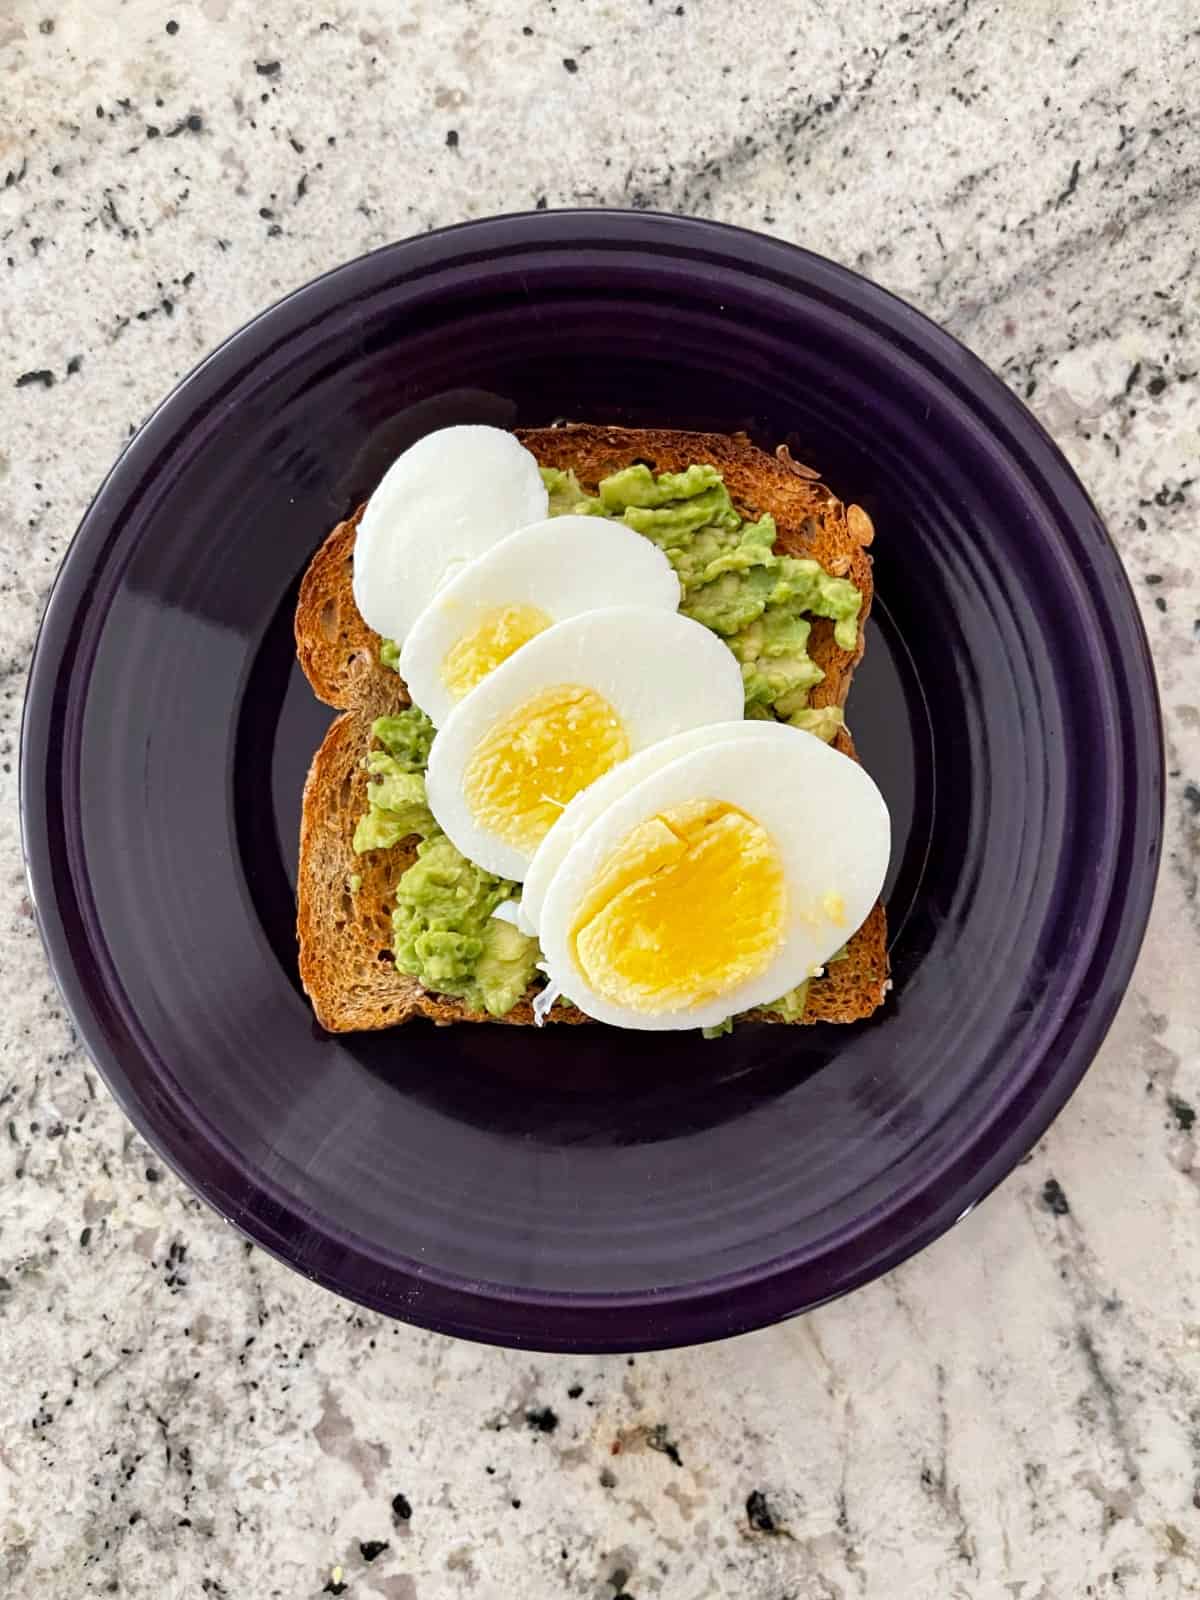 Avocado toast topped with sliced hard boiled egg on purple plate.